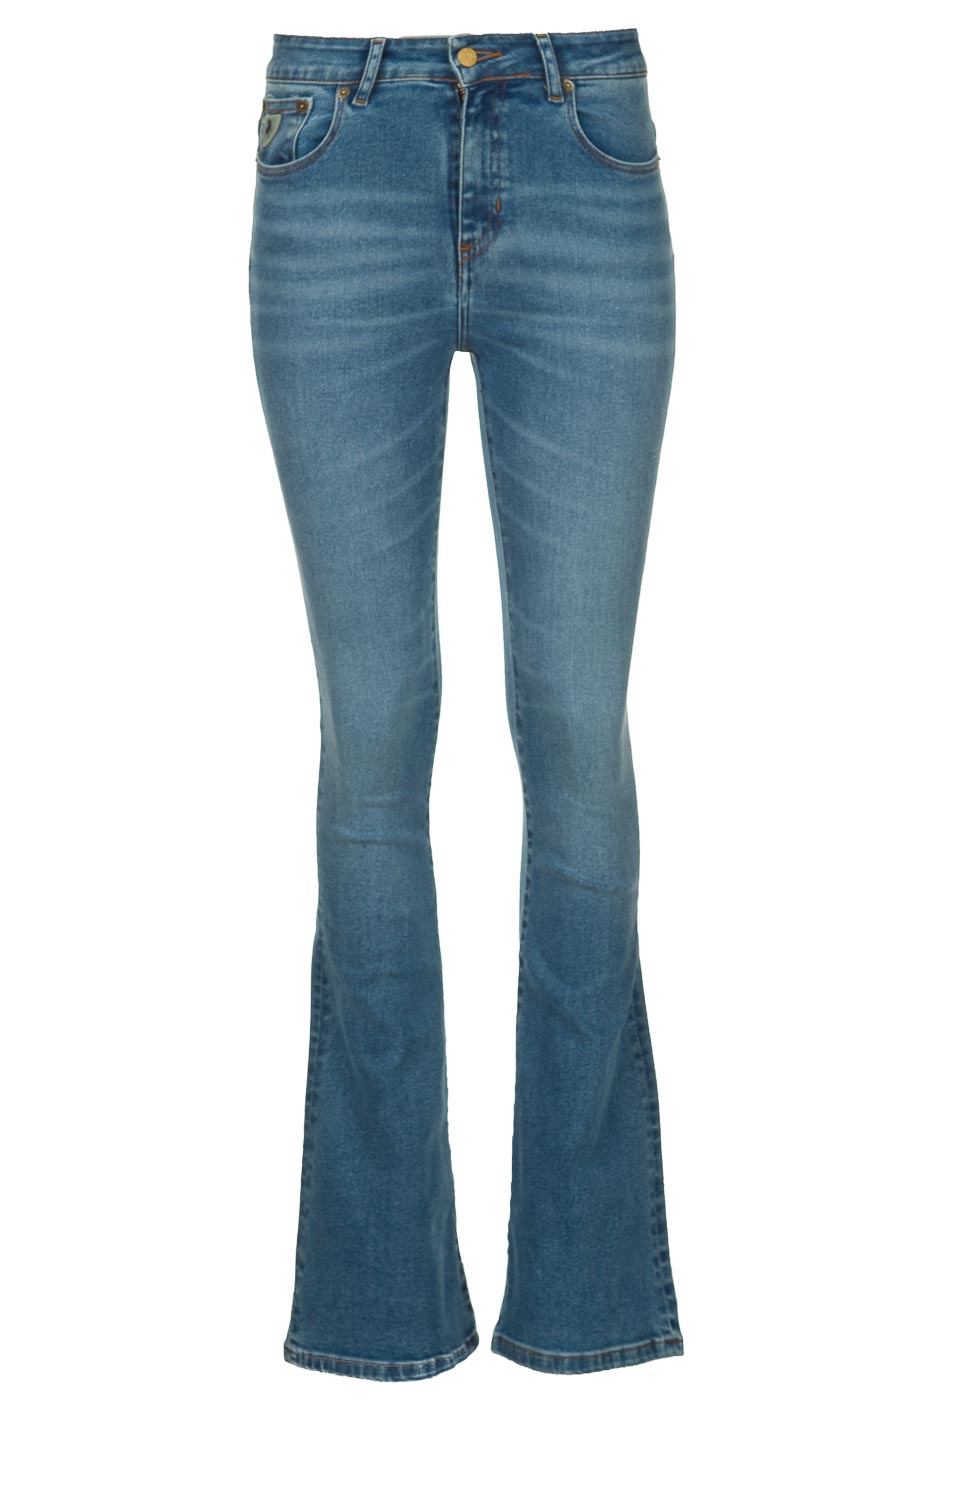 jeans for women size 16